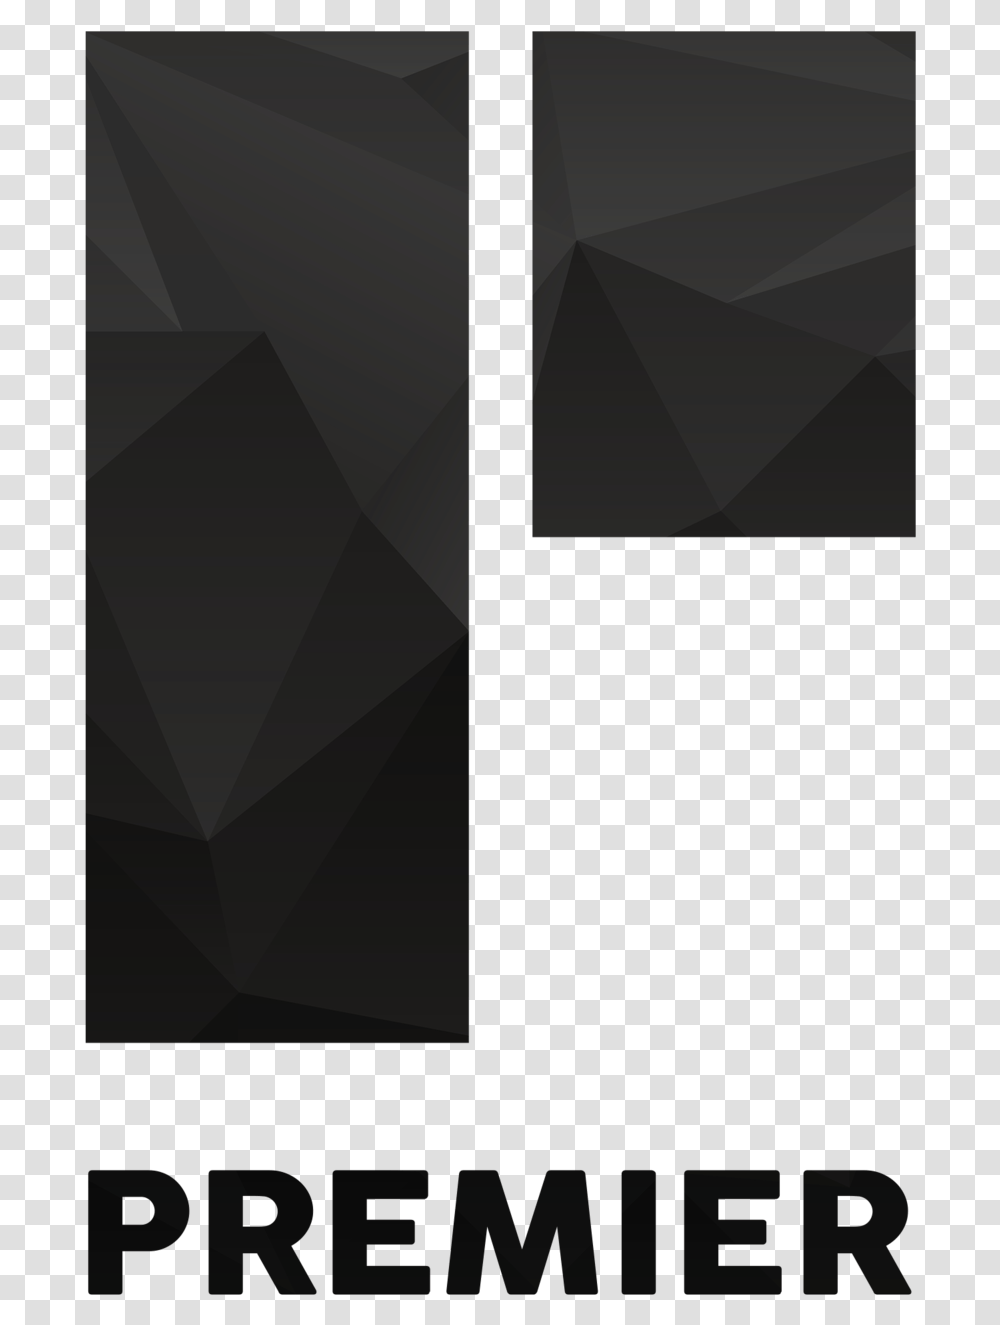 Premier Logo Black Abstract Triangle, Collage, Poster, Advertisement Transparent Png